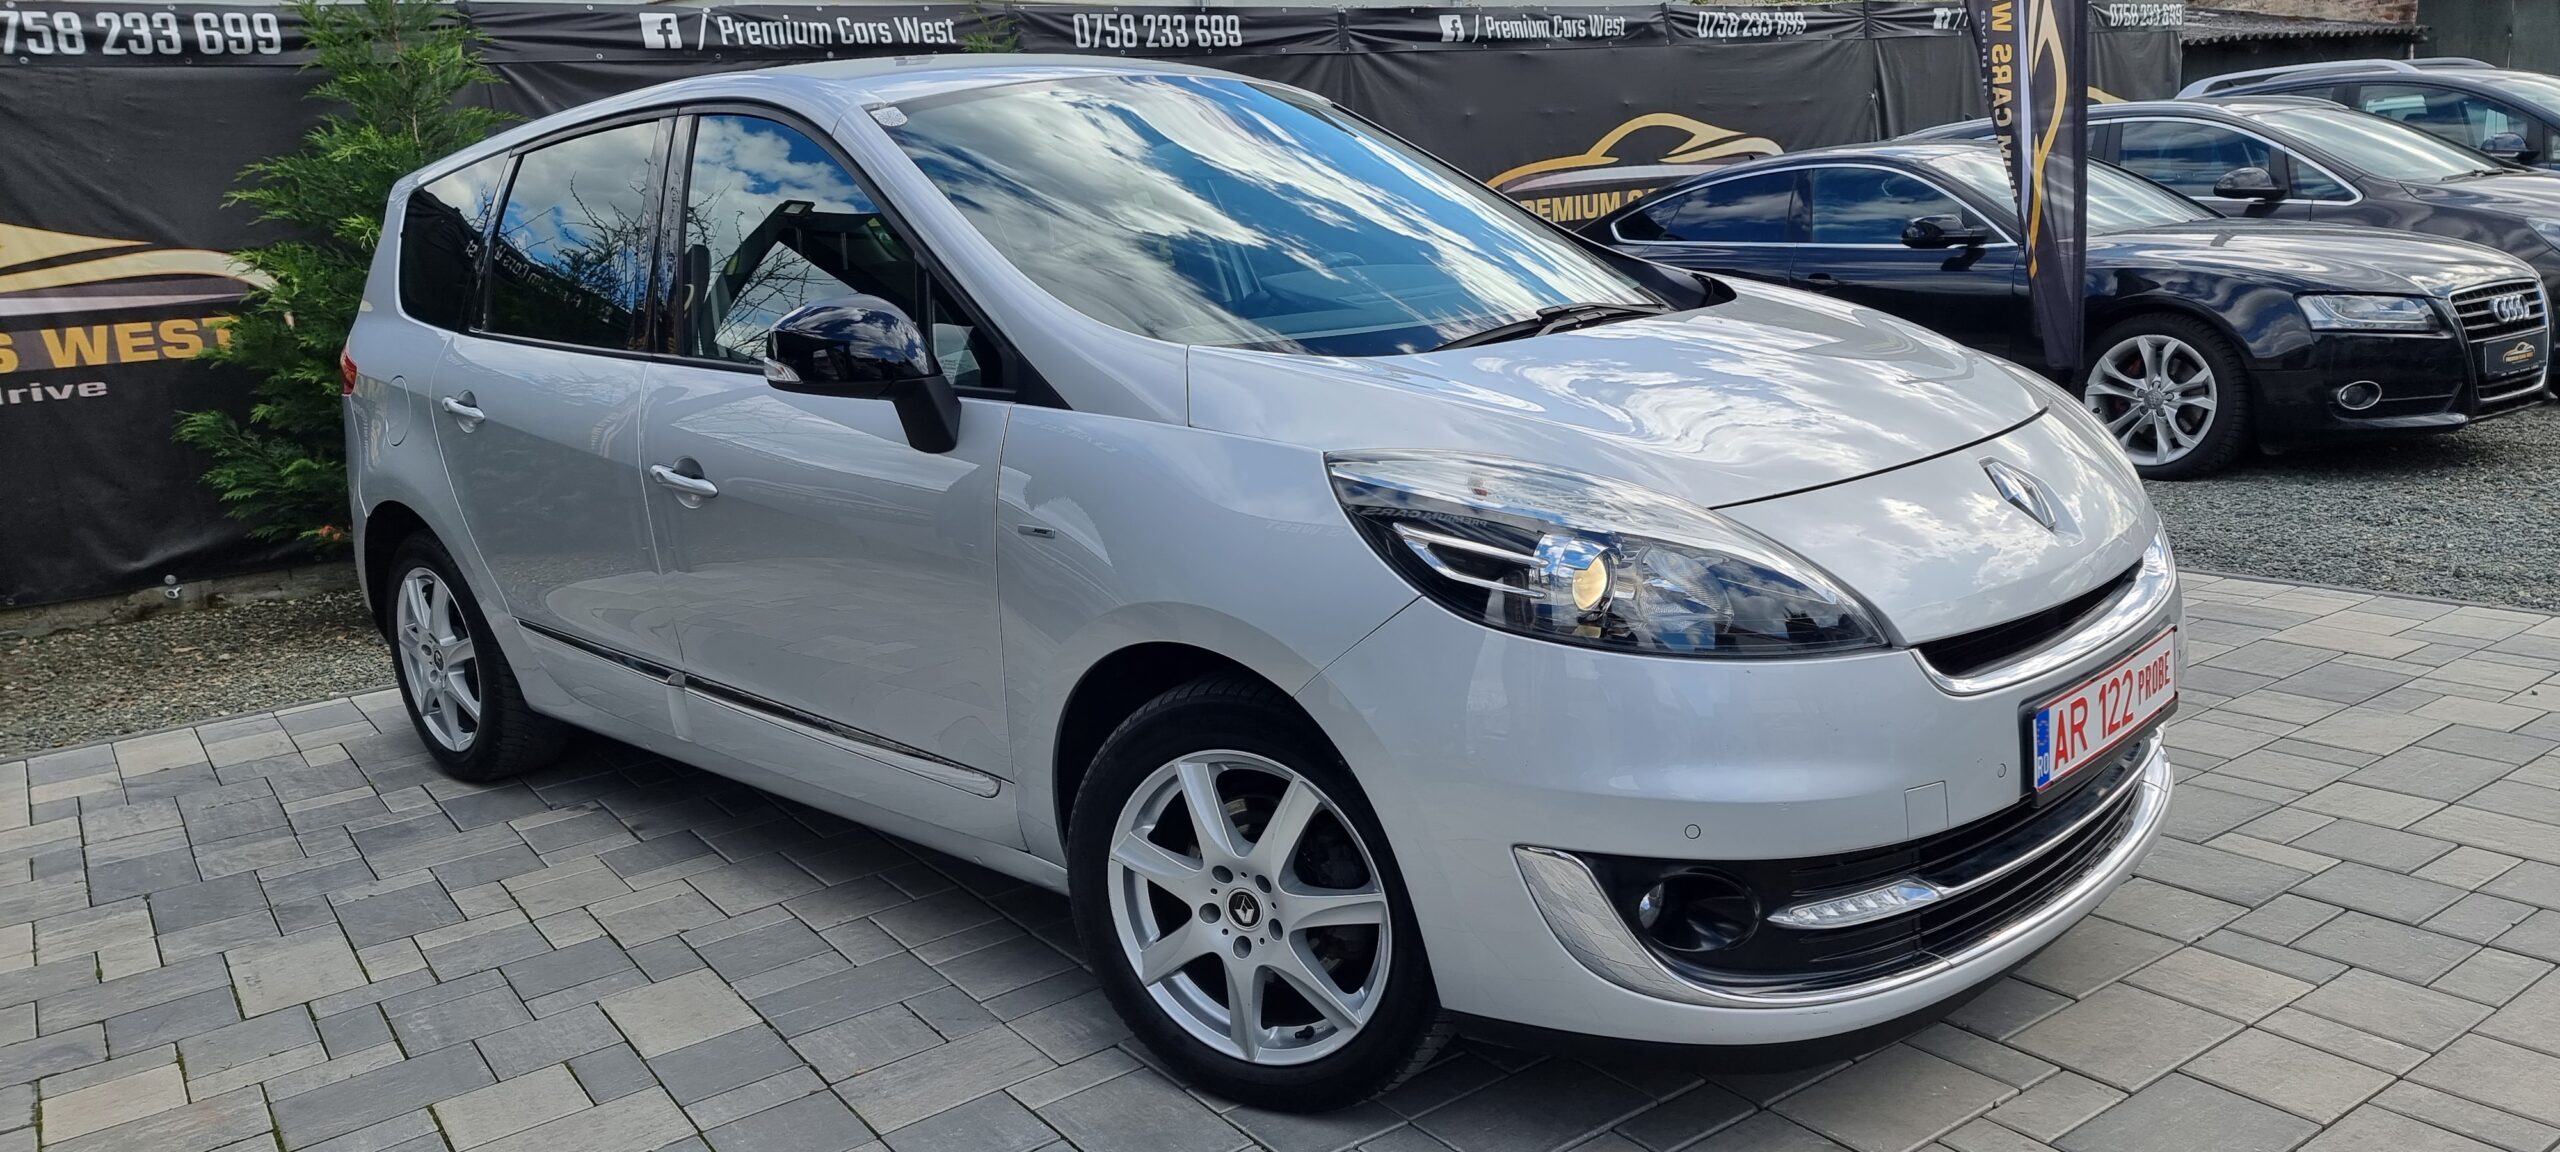 RENAULT GRAND SCENIC, 1.5 DIESEL, 110 CP, EURO 5, AN 2012